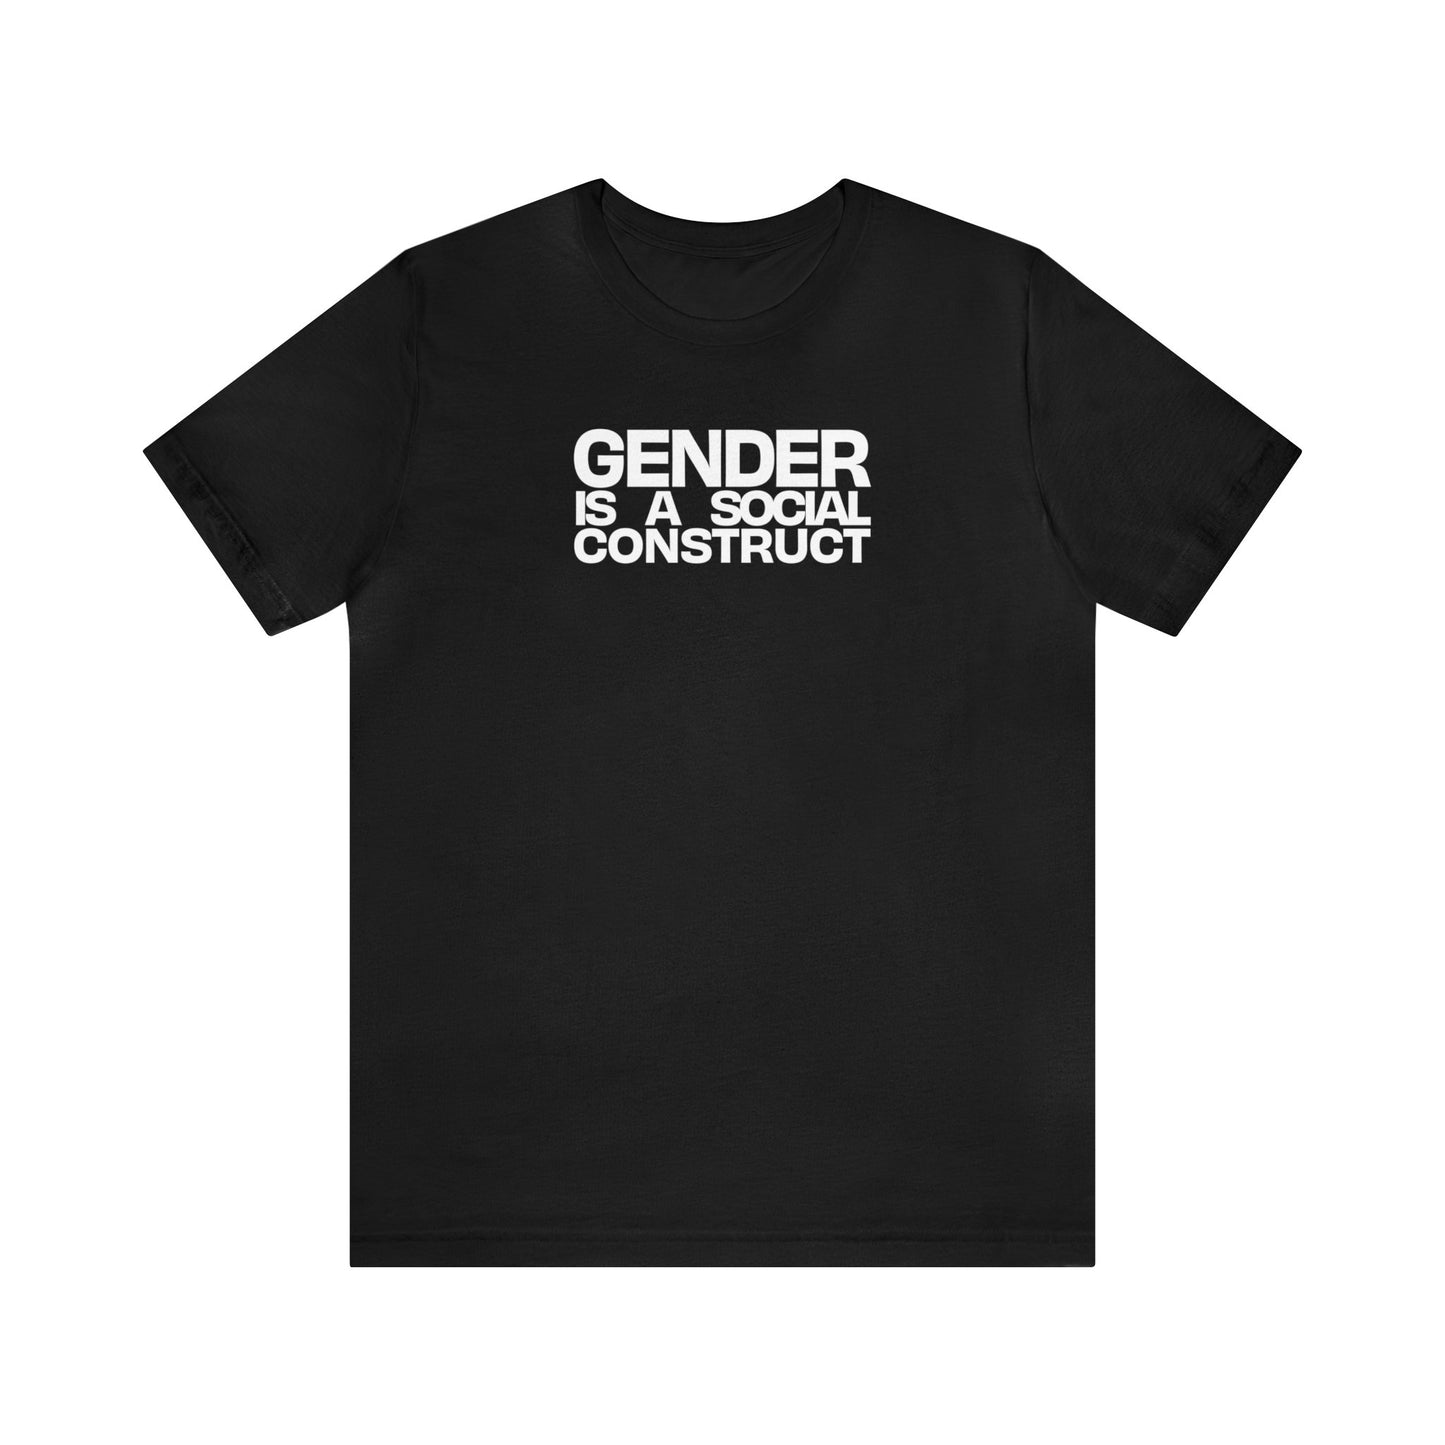 Gender Is A Social Construct Tee